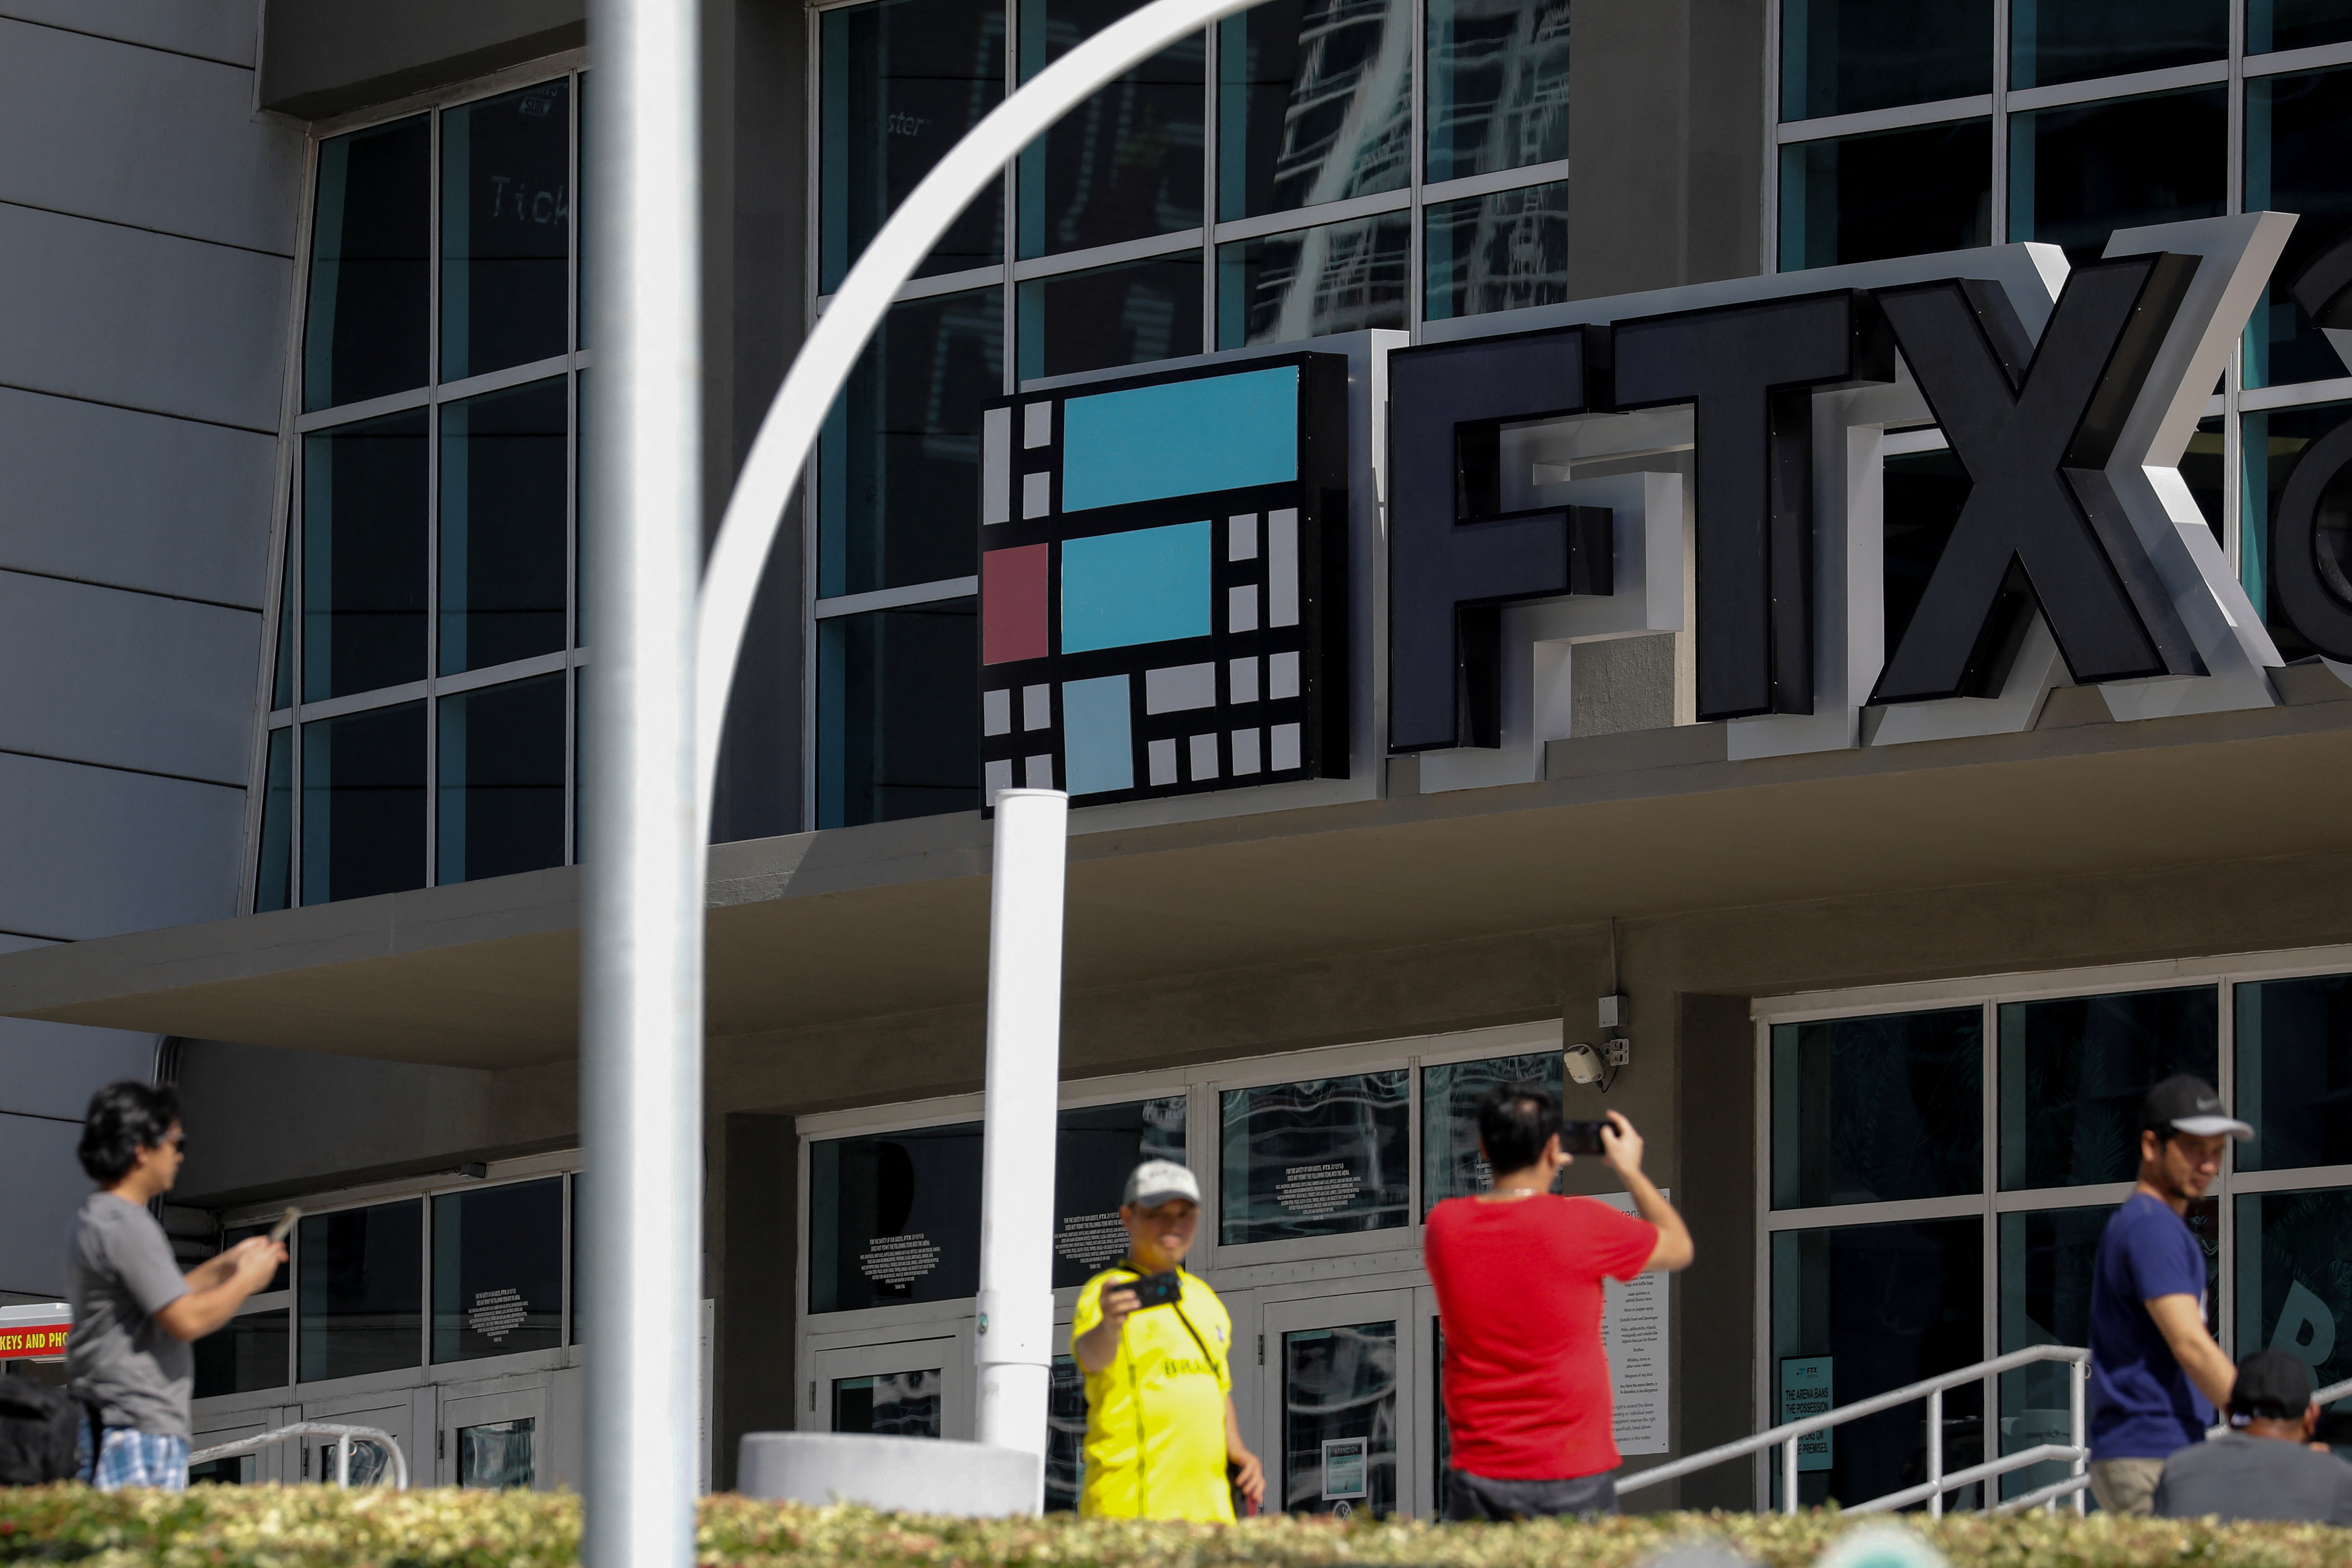 The FTX logo can be seen at the FTX Arena in Miami